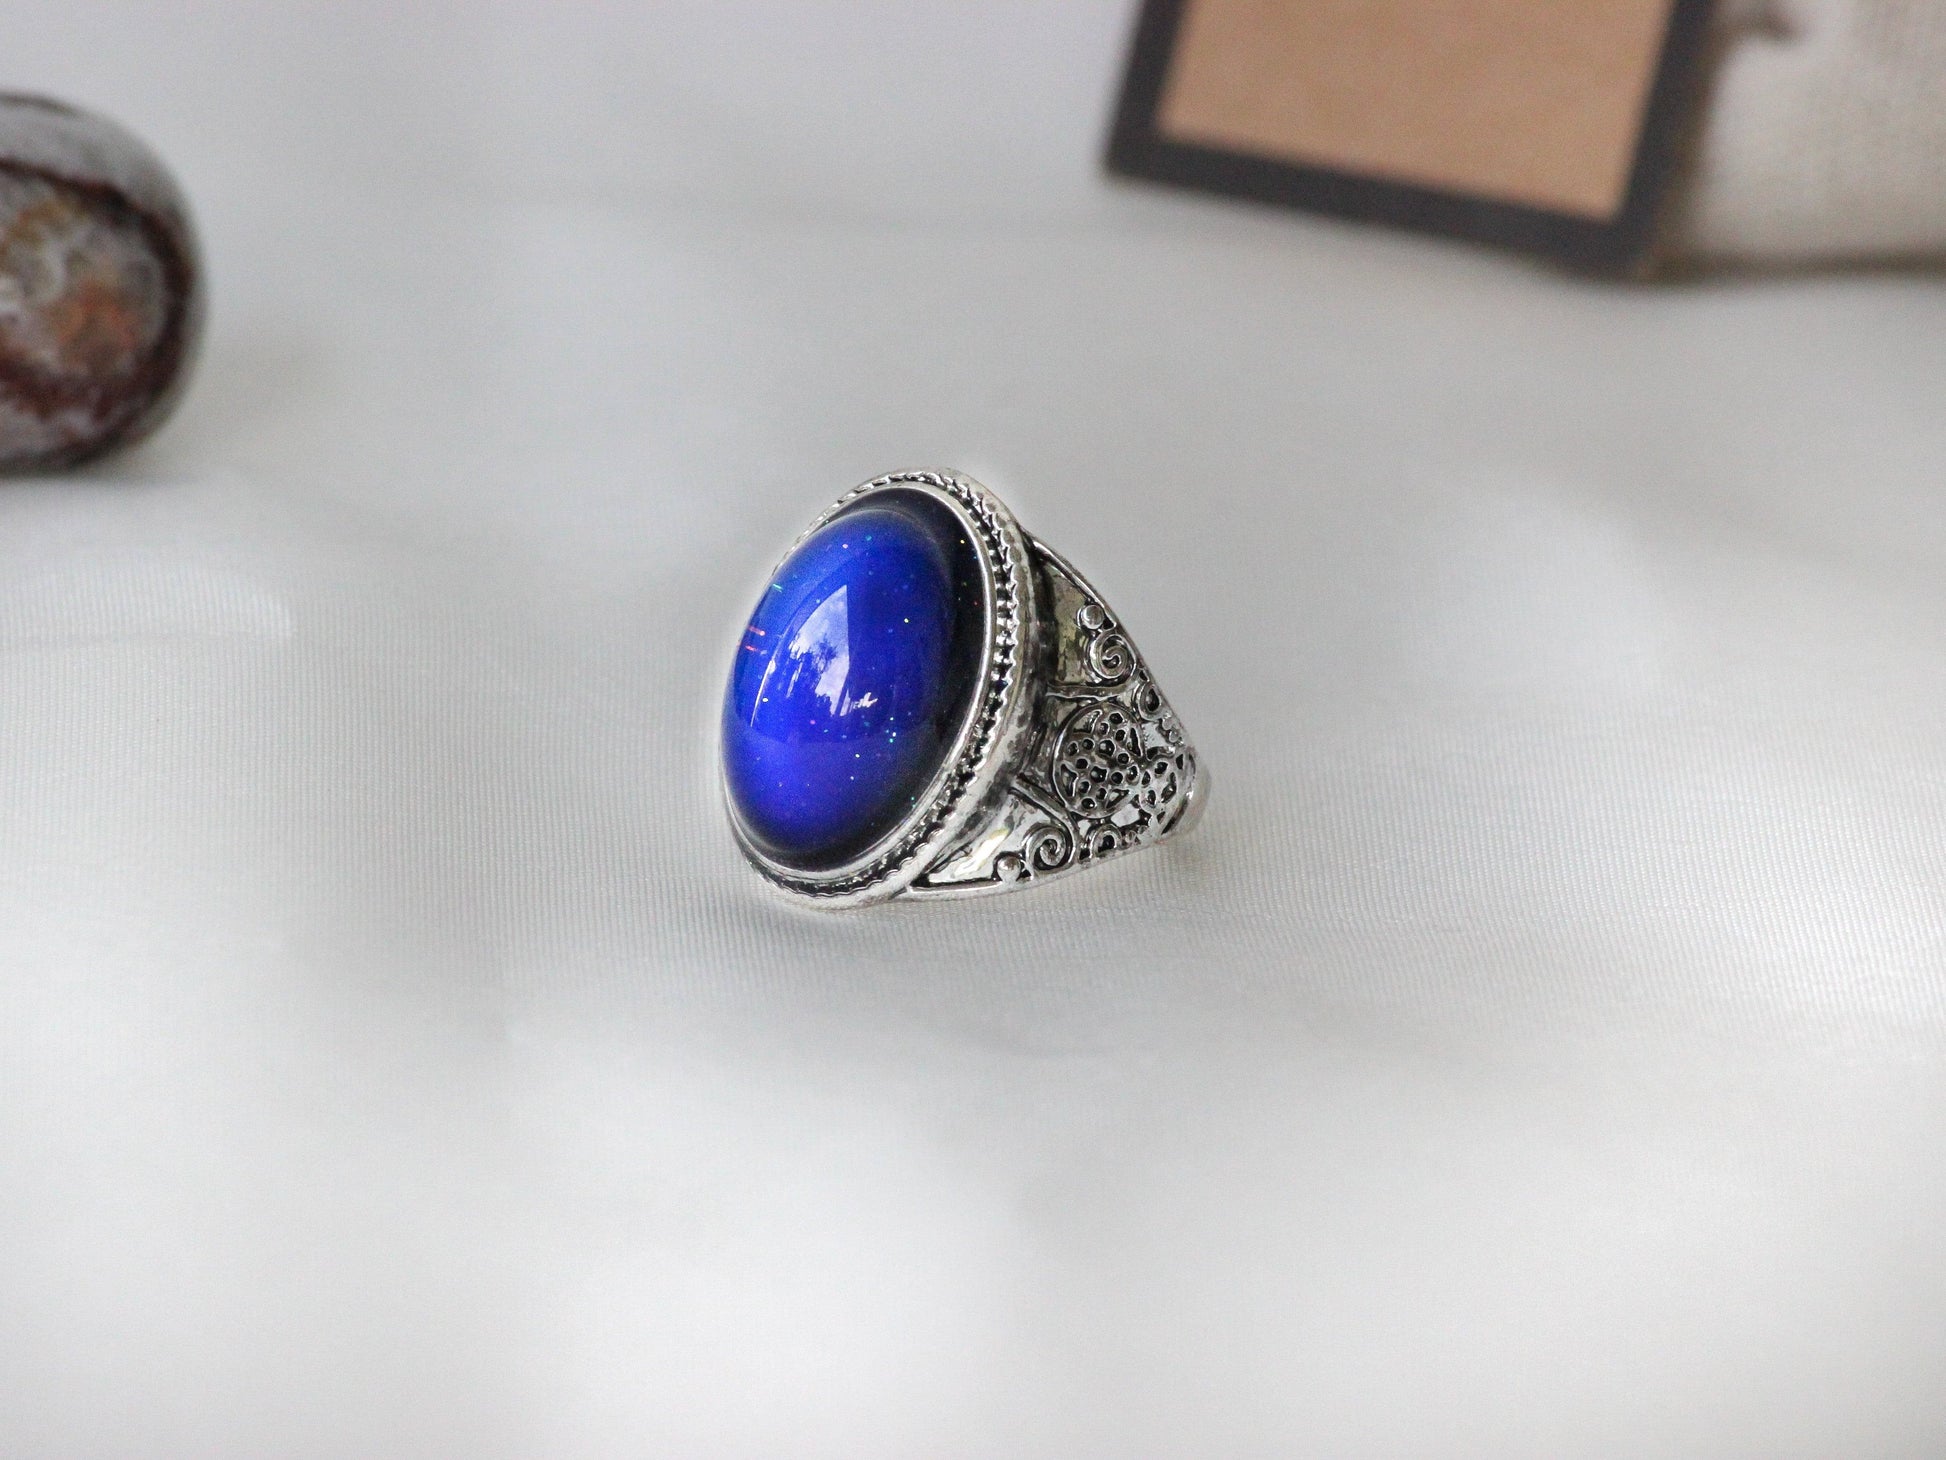 Antique Silver Plating Spiritual Oval Stone Mood Ring.